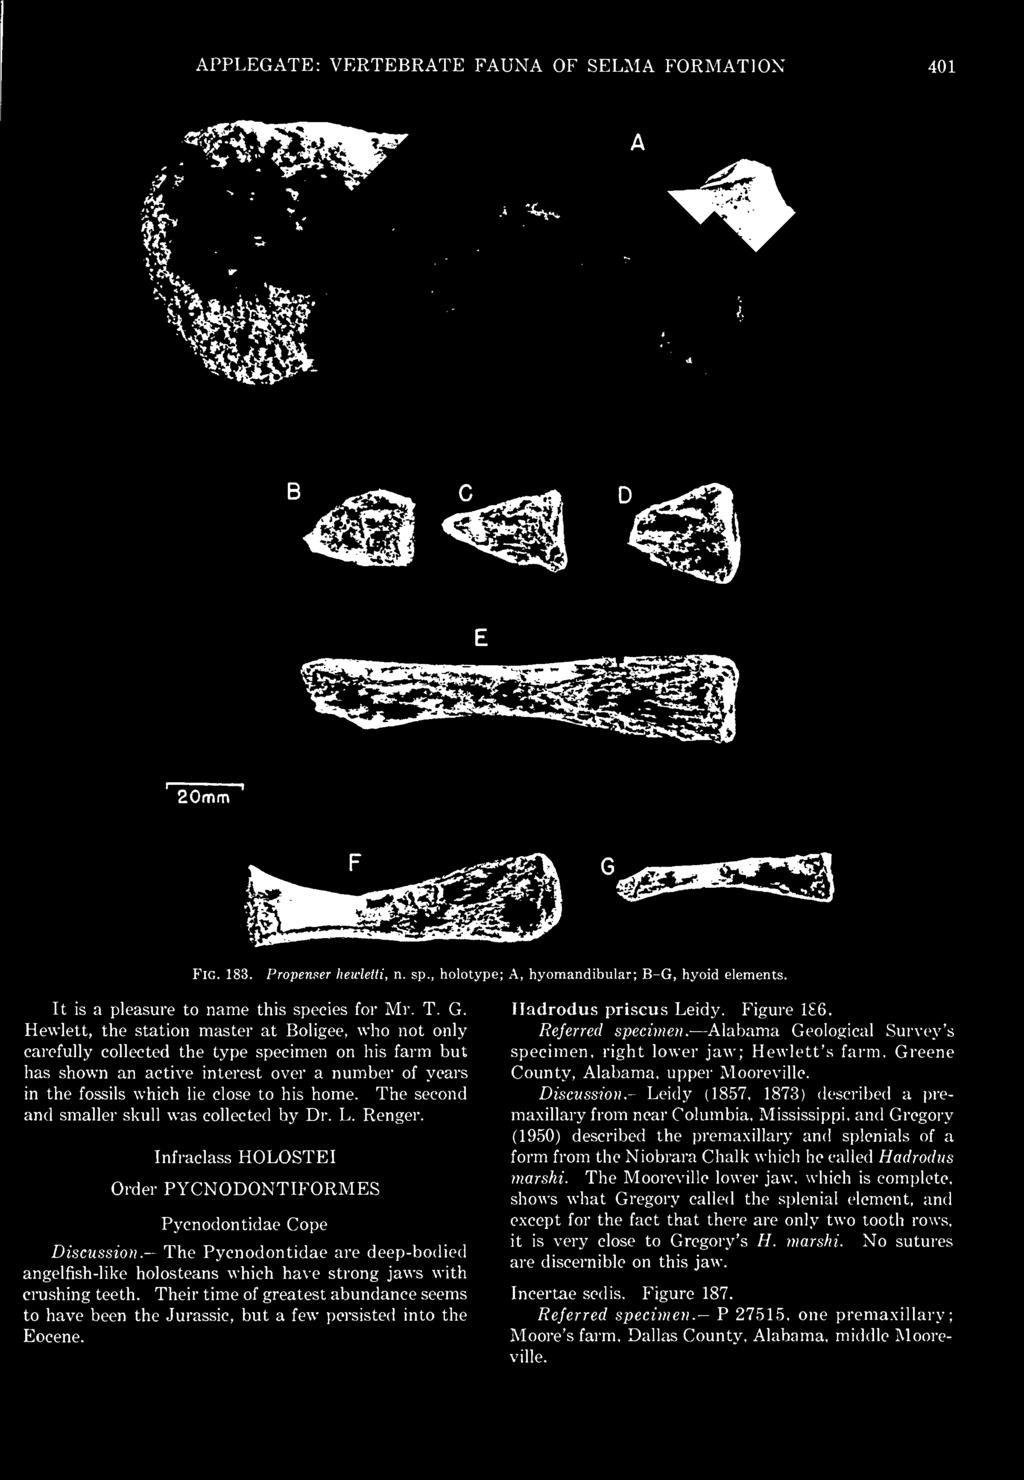 Their time of greatest abundance seems to have been the Jurassic, but a few persisted into the Eocene. Hadrodus priscus Leidy. Figure 1 6. Referred specimen.